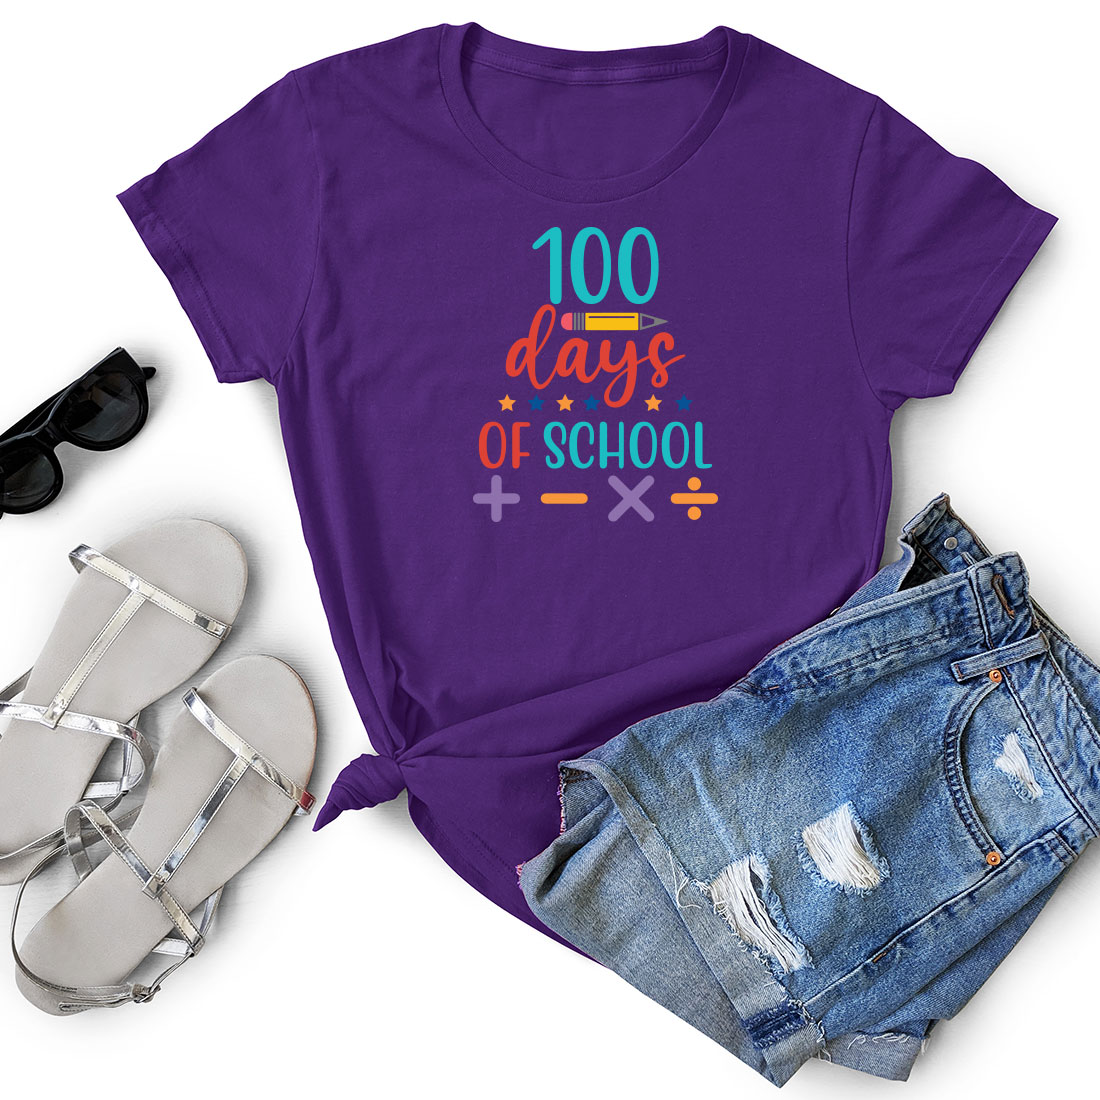 Purple shirt with the words 100 days of school on it.